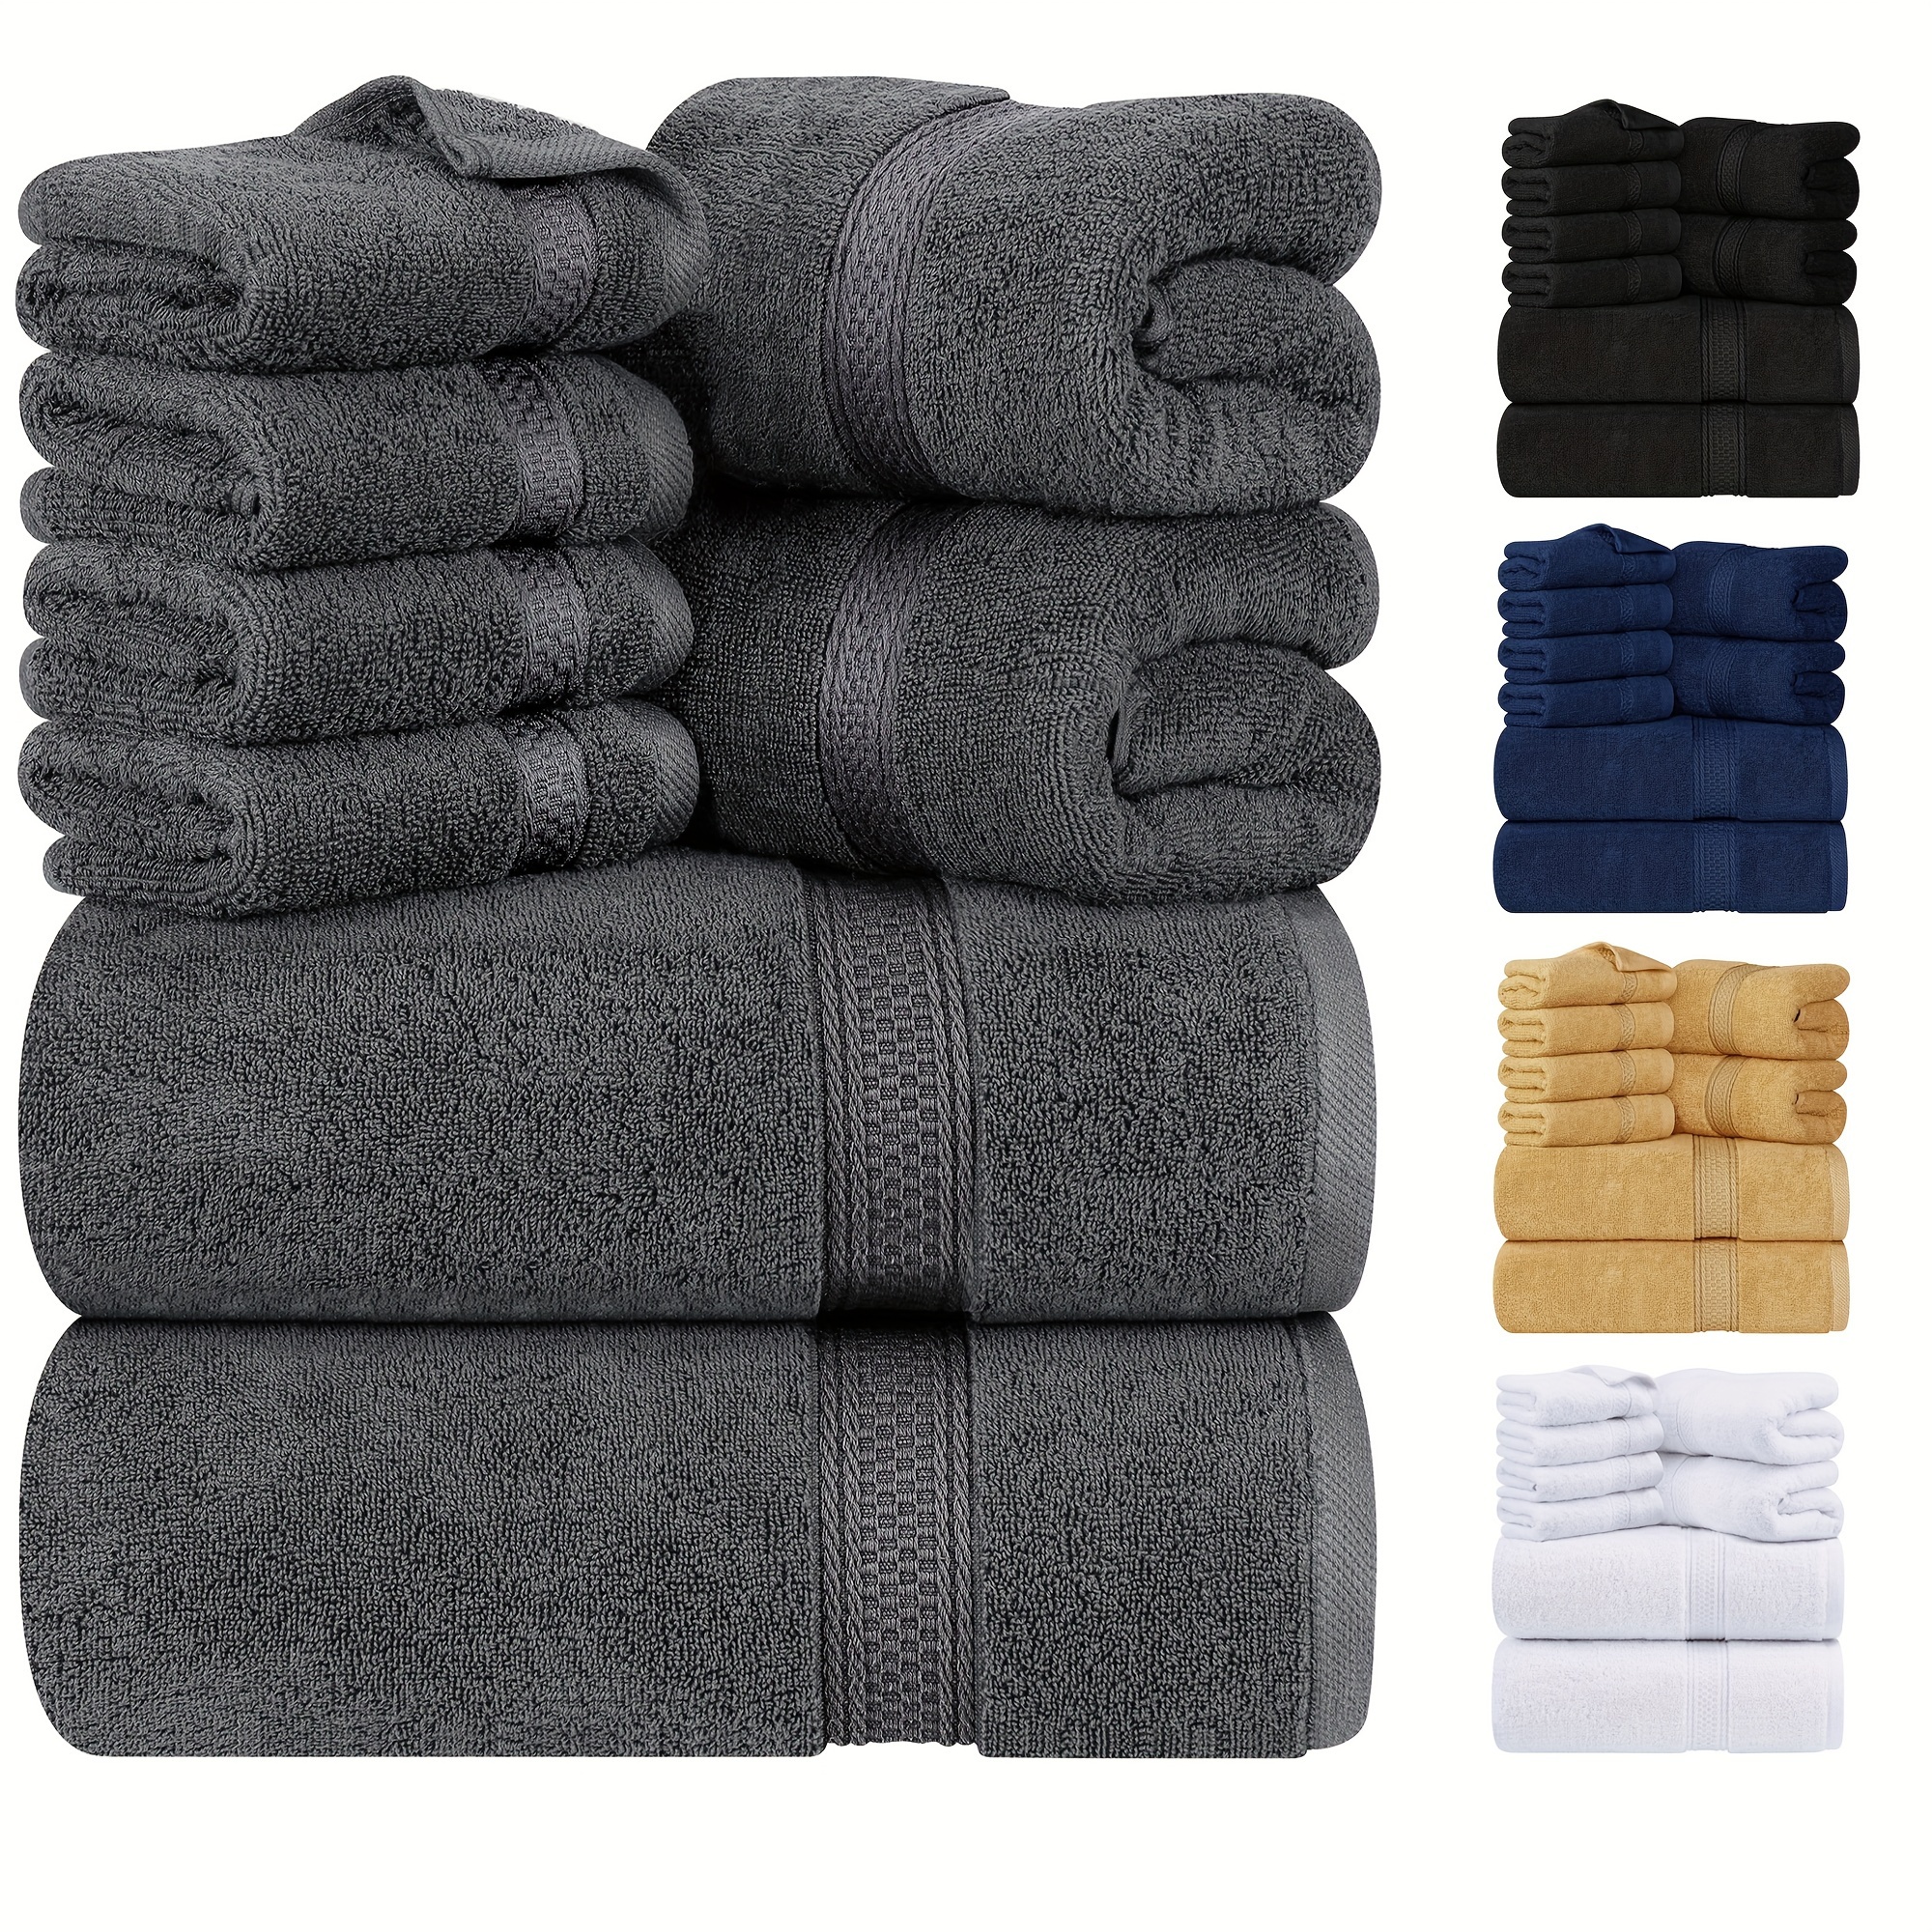 Buy Bath Pure Towels Long Stapled Cotton Beach Spa Thicken Super Absorbent  Towel Sets by Just Green Tech on Dot & Bo